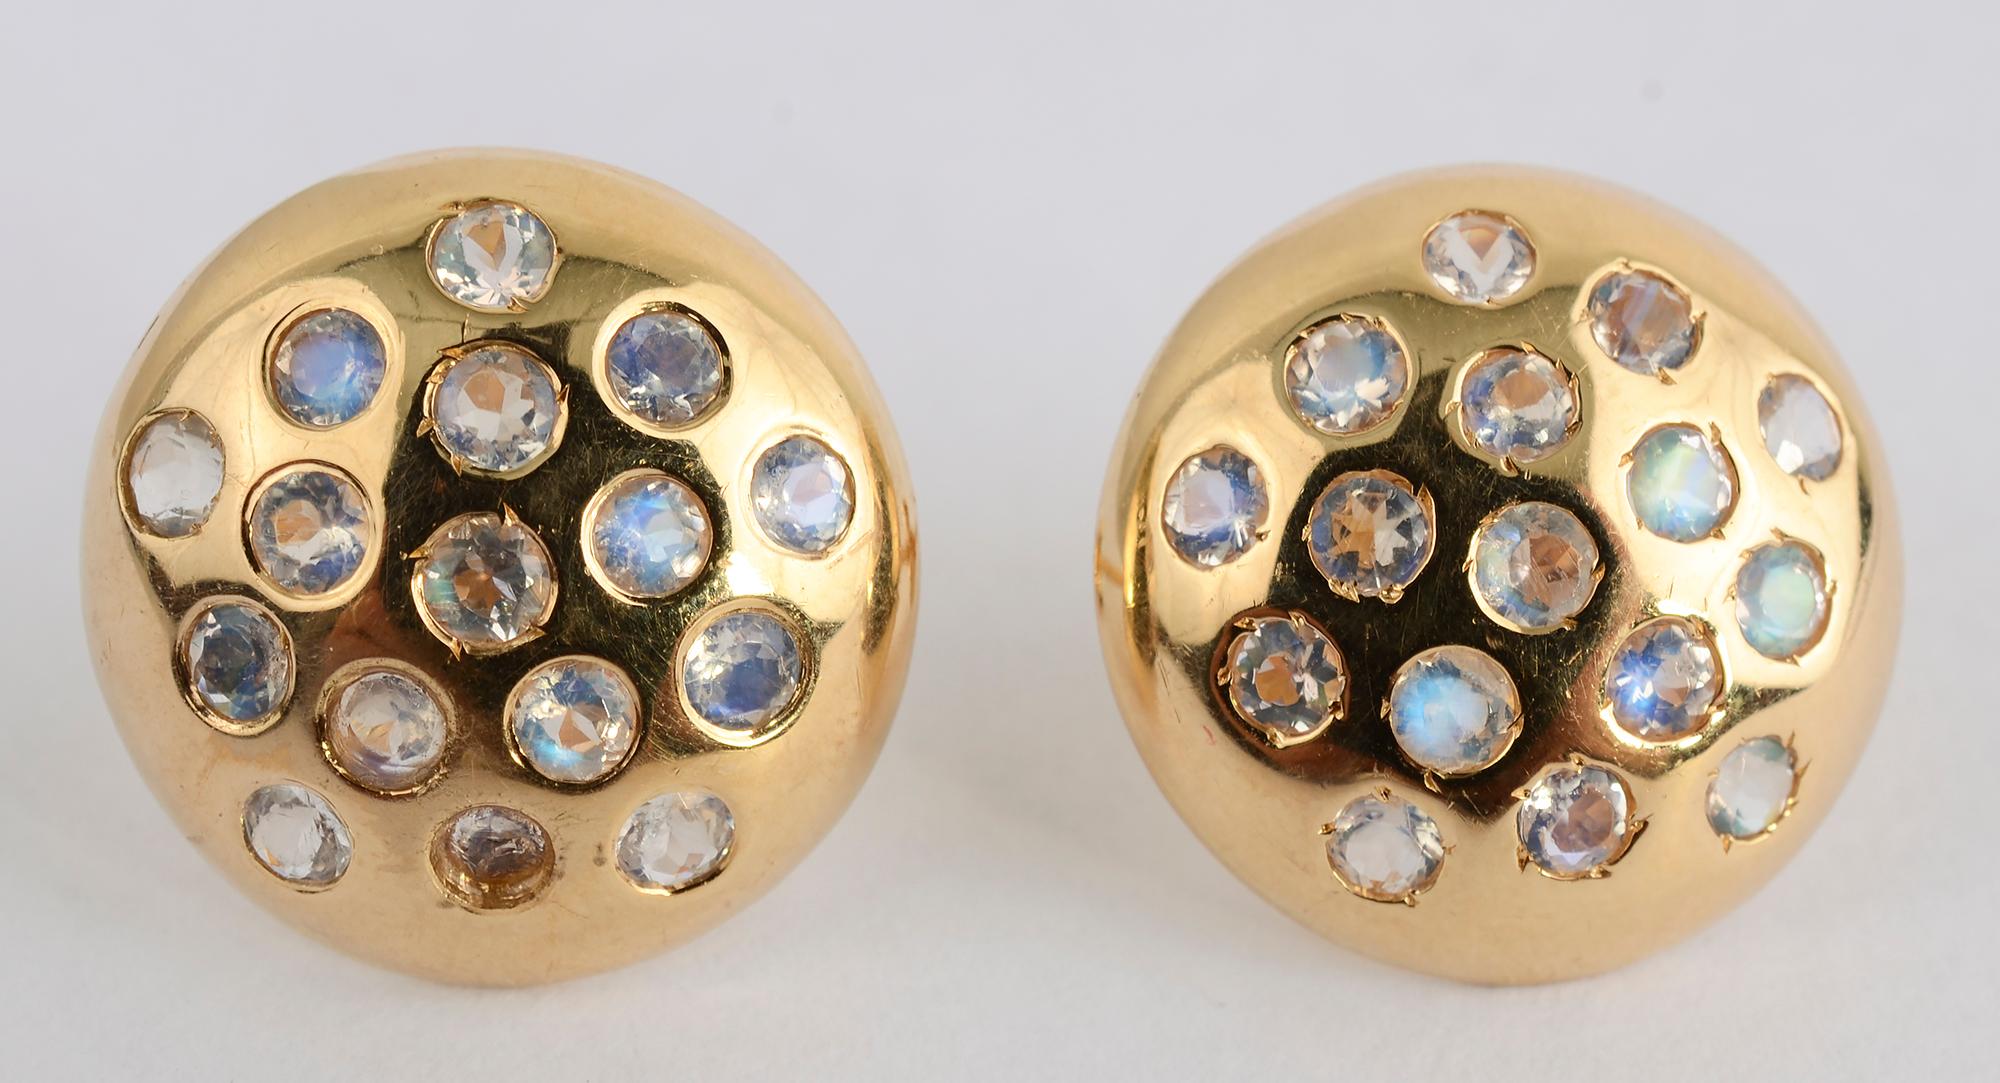 Eighteen karat button earrings, each with 16 moonstones. Made by the Spanish firm, Tous. Backs are posts.